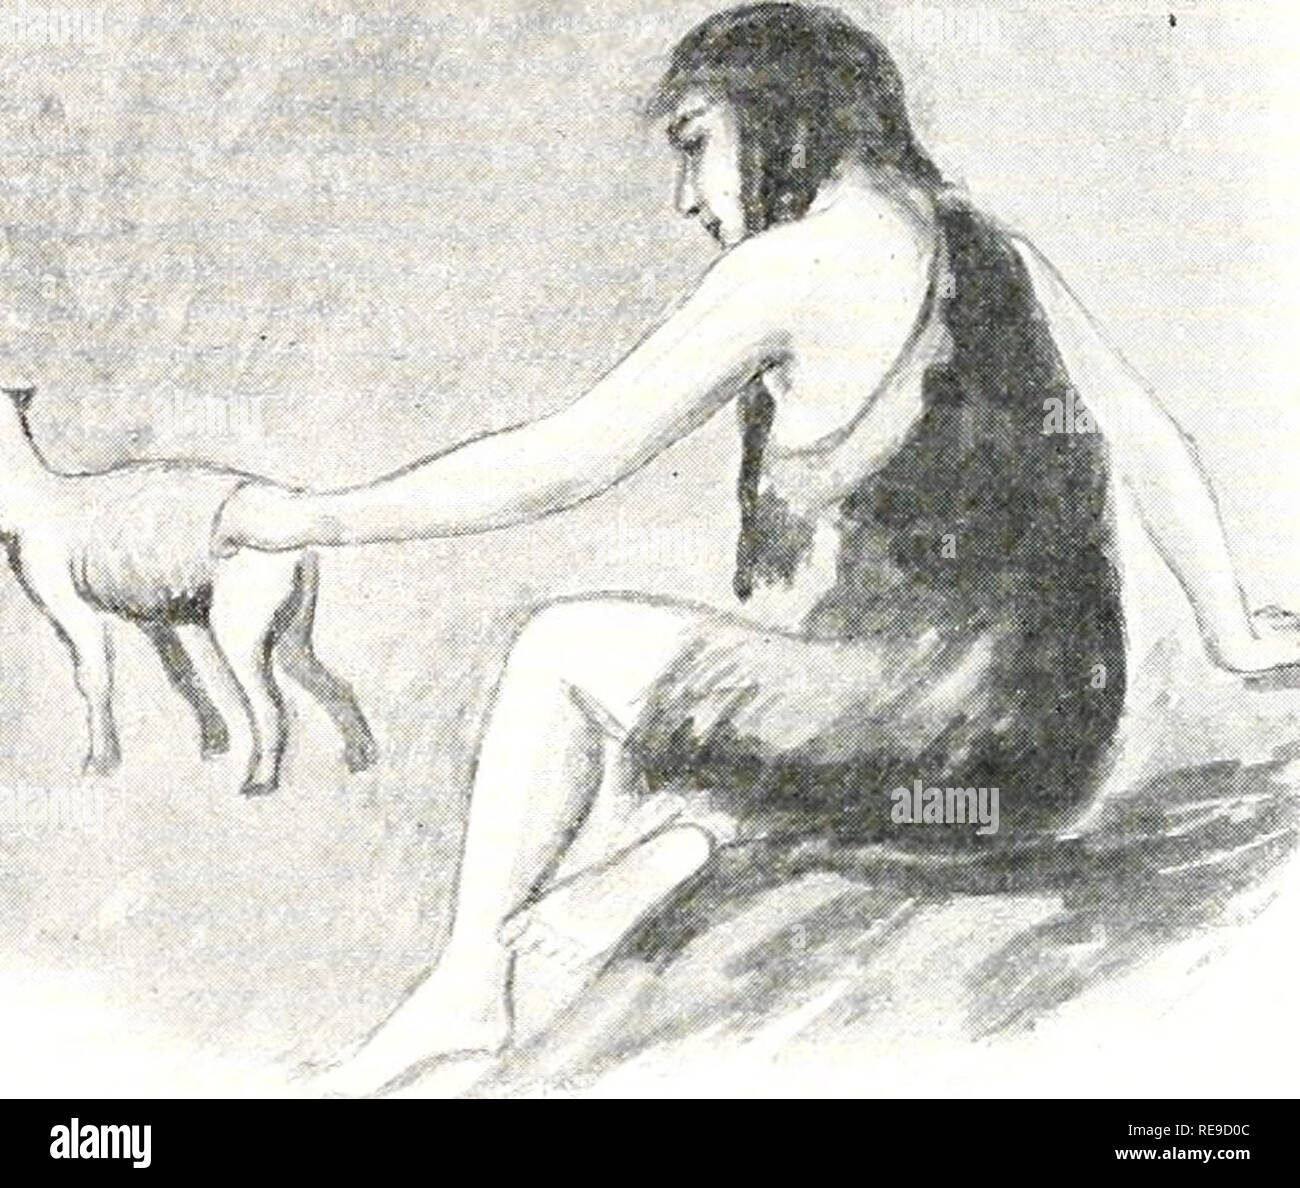 . The early herdsmen. Prehistoric peoples. 164 The Early Herdsmen i. She let the hunt) run to its mother Do-little and Eat-well looked puzzled. The other men laughed. For the lamb Many-dogs had in his game-bag was a live lamb. Spin-a-thread tethered the lame ewe and bathed its leg in fresh water. And although the ewe was very wild, she soon became quiet, for Spin-a-thread soothed the sheep with sweet songs and she let the lamb run to its mother. THINGS TO DO Find out all you can about the horns of wild sheep; of tame ones. How do they differ from the horns of the goat? Find out whether ewes ha Stock Photo